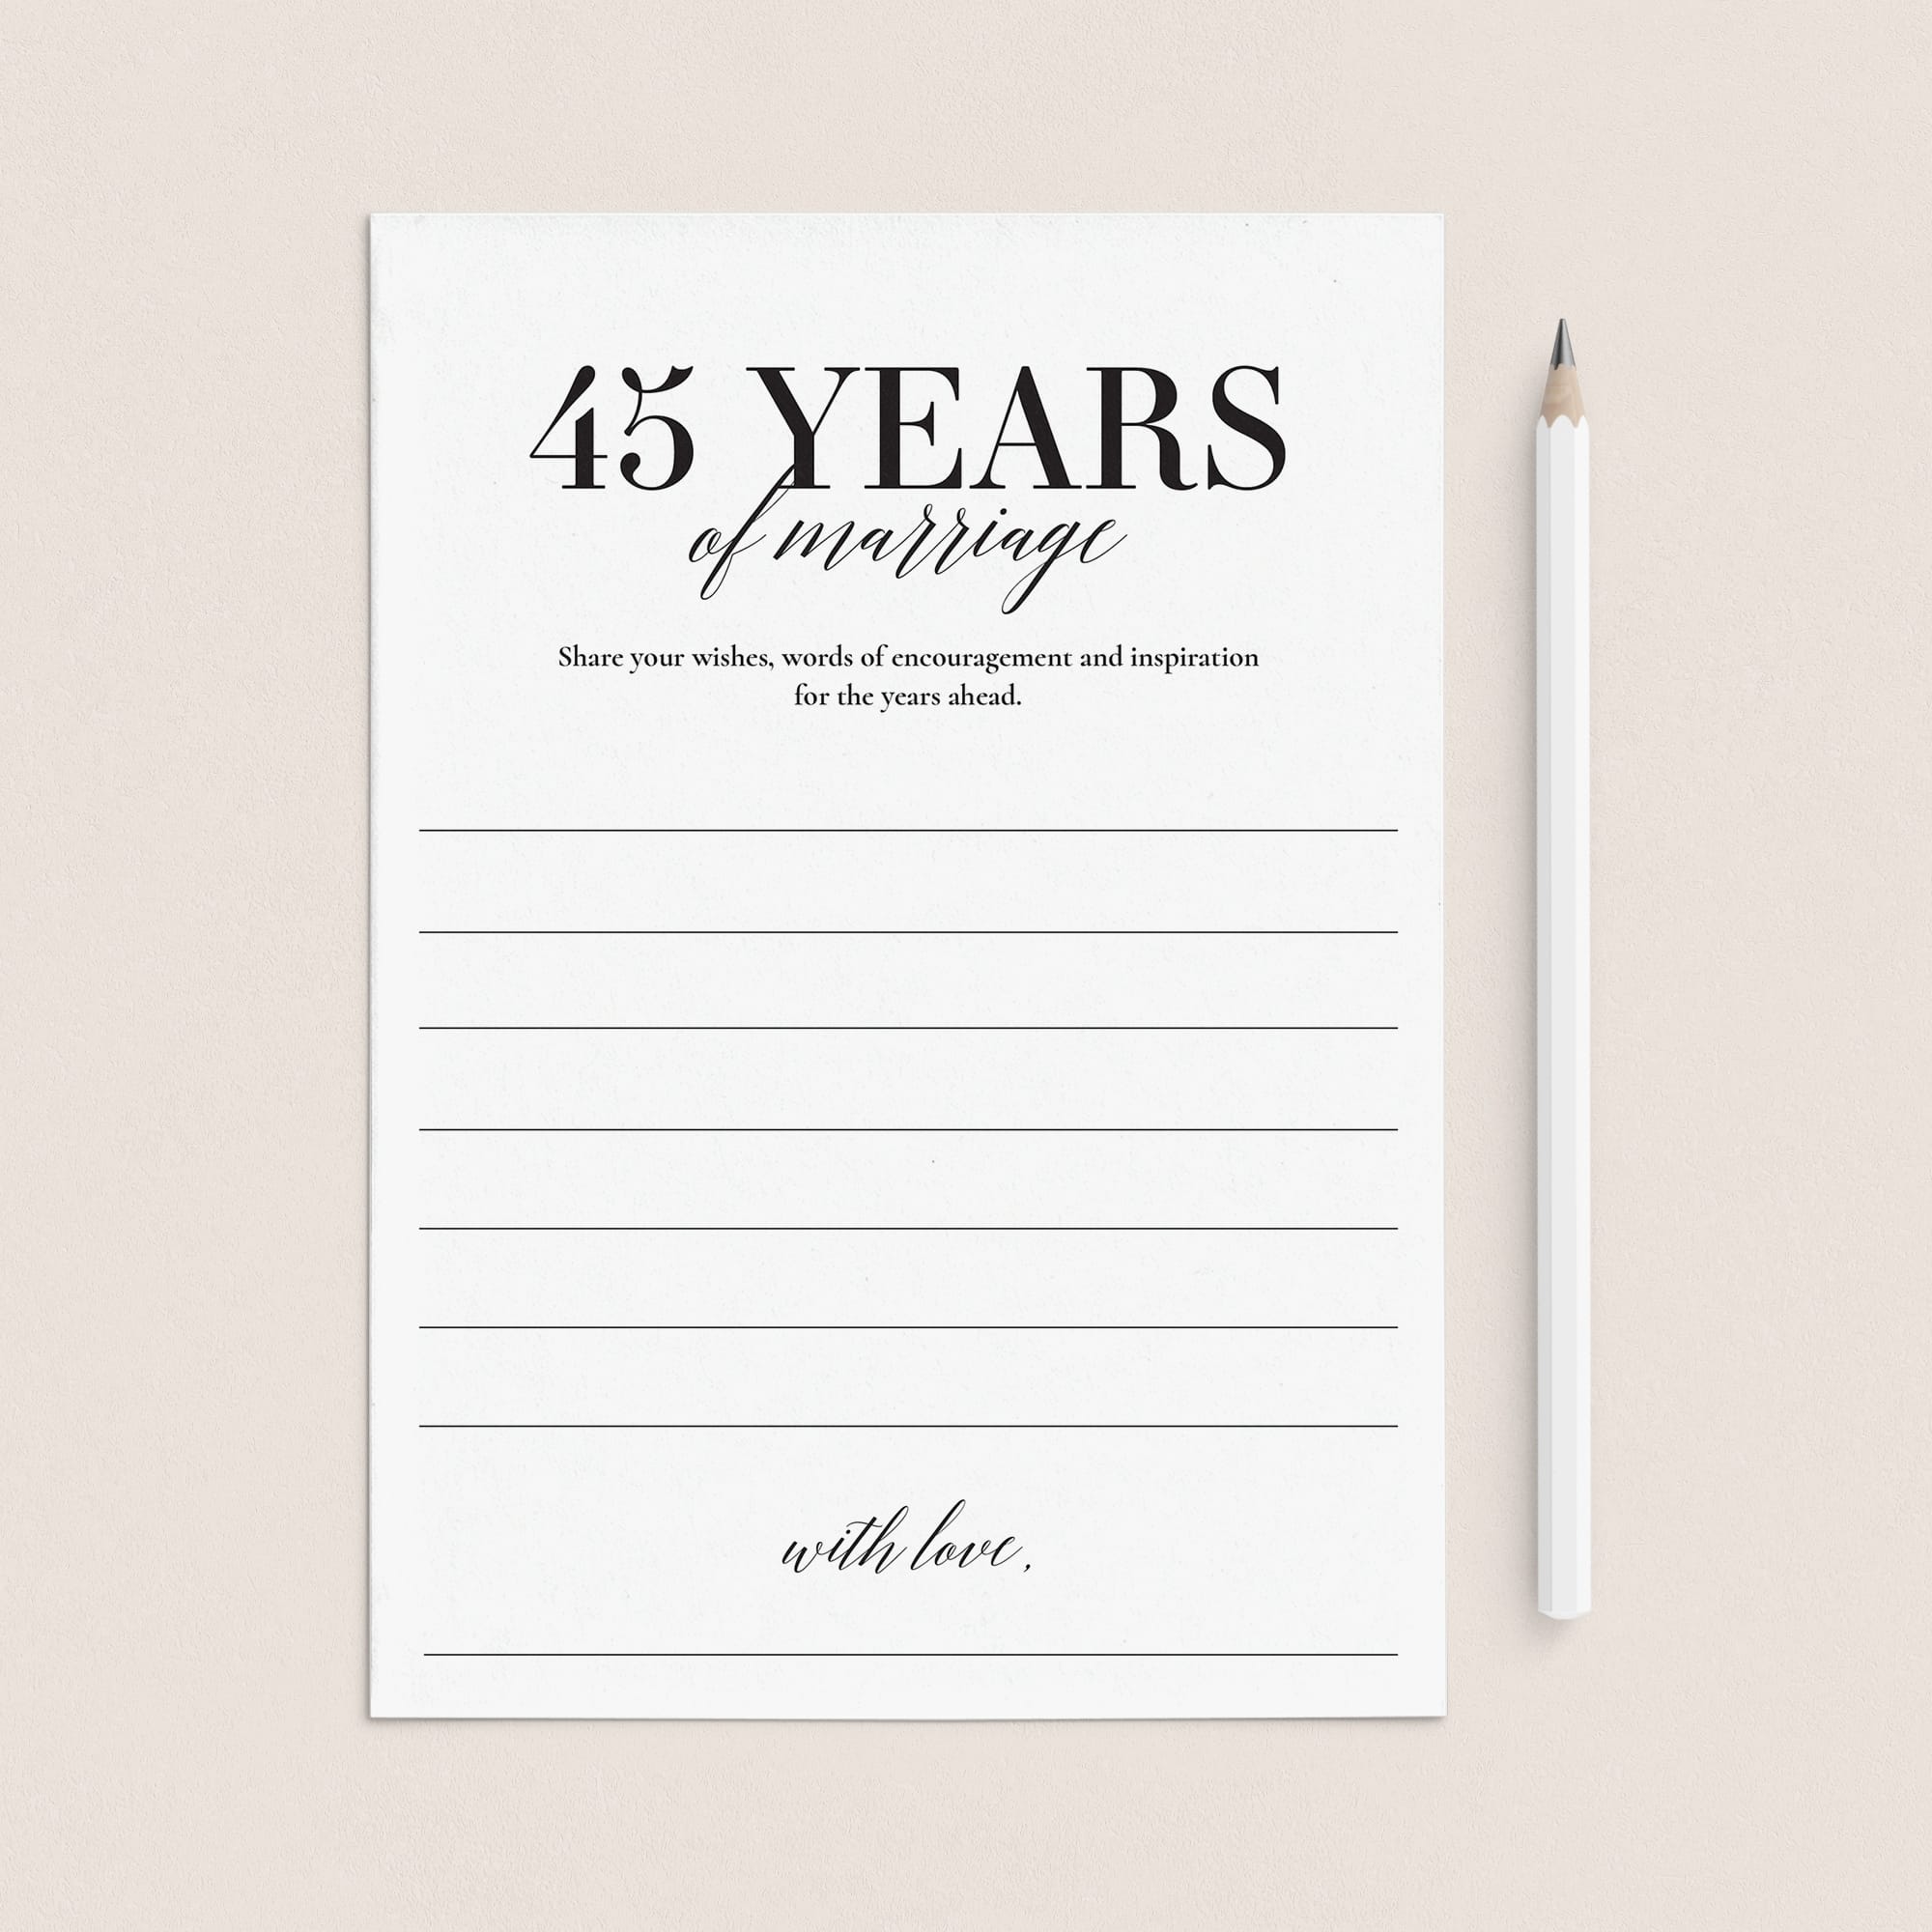 45th Wedding Anniversary Wishes & Advice Card Printable by LittleSizzle